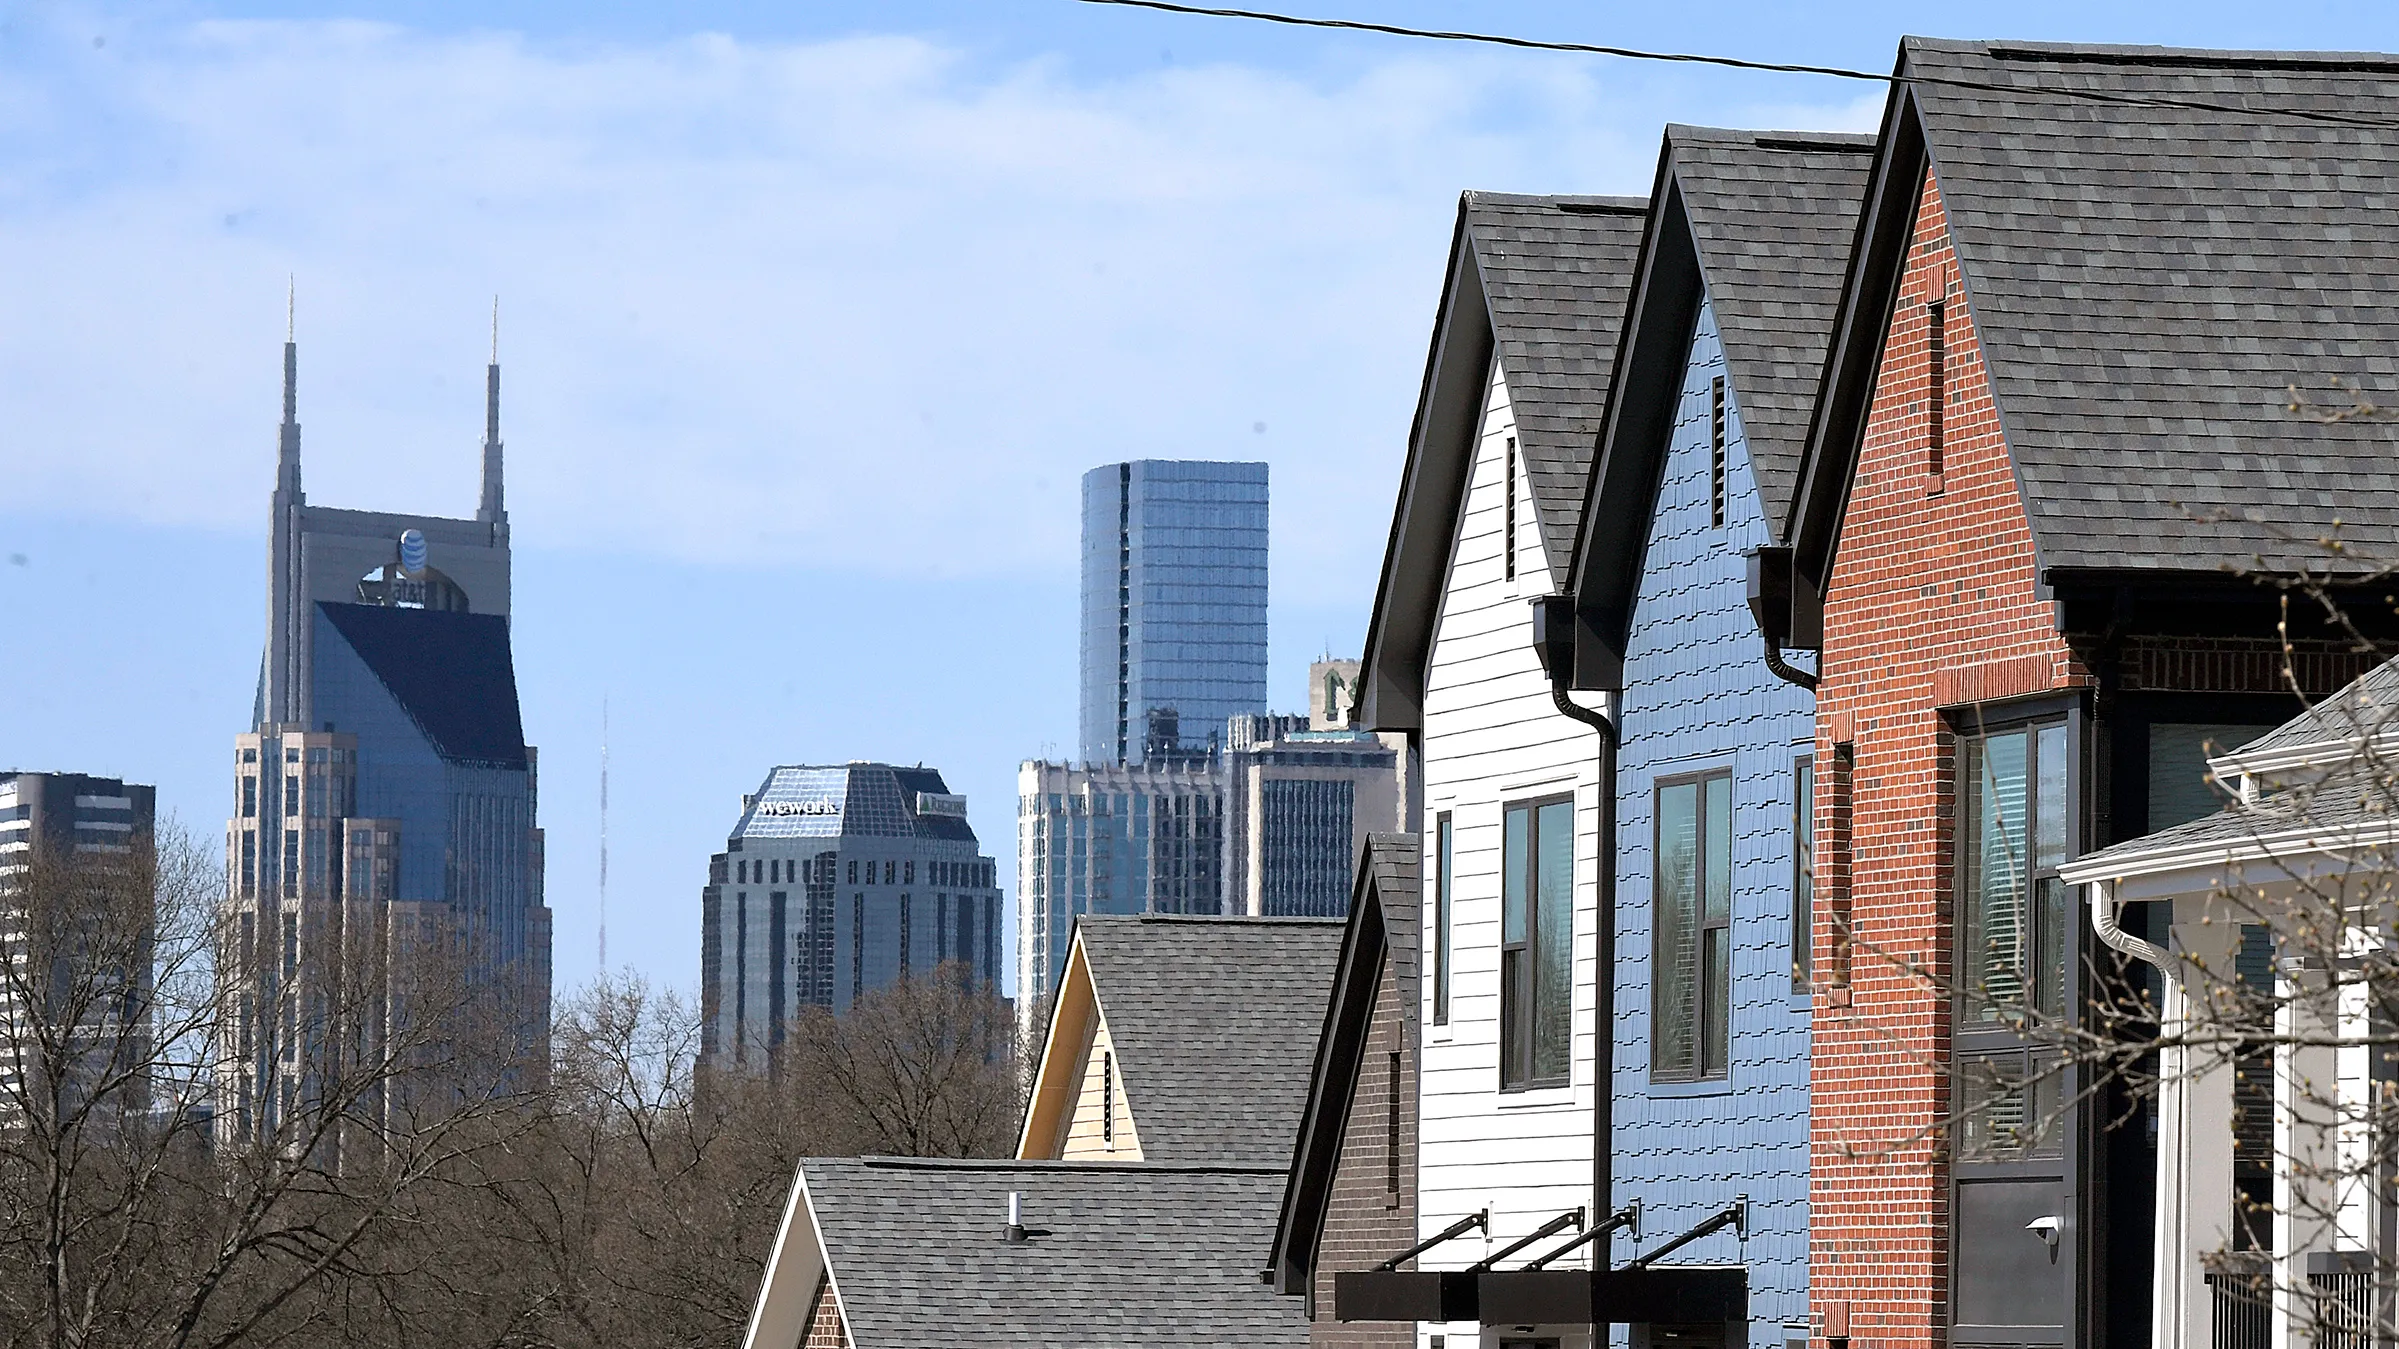 AARP To Host Affordable Housing Roundtable With Nashville Leaders Oct. 5